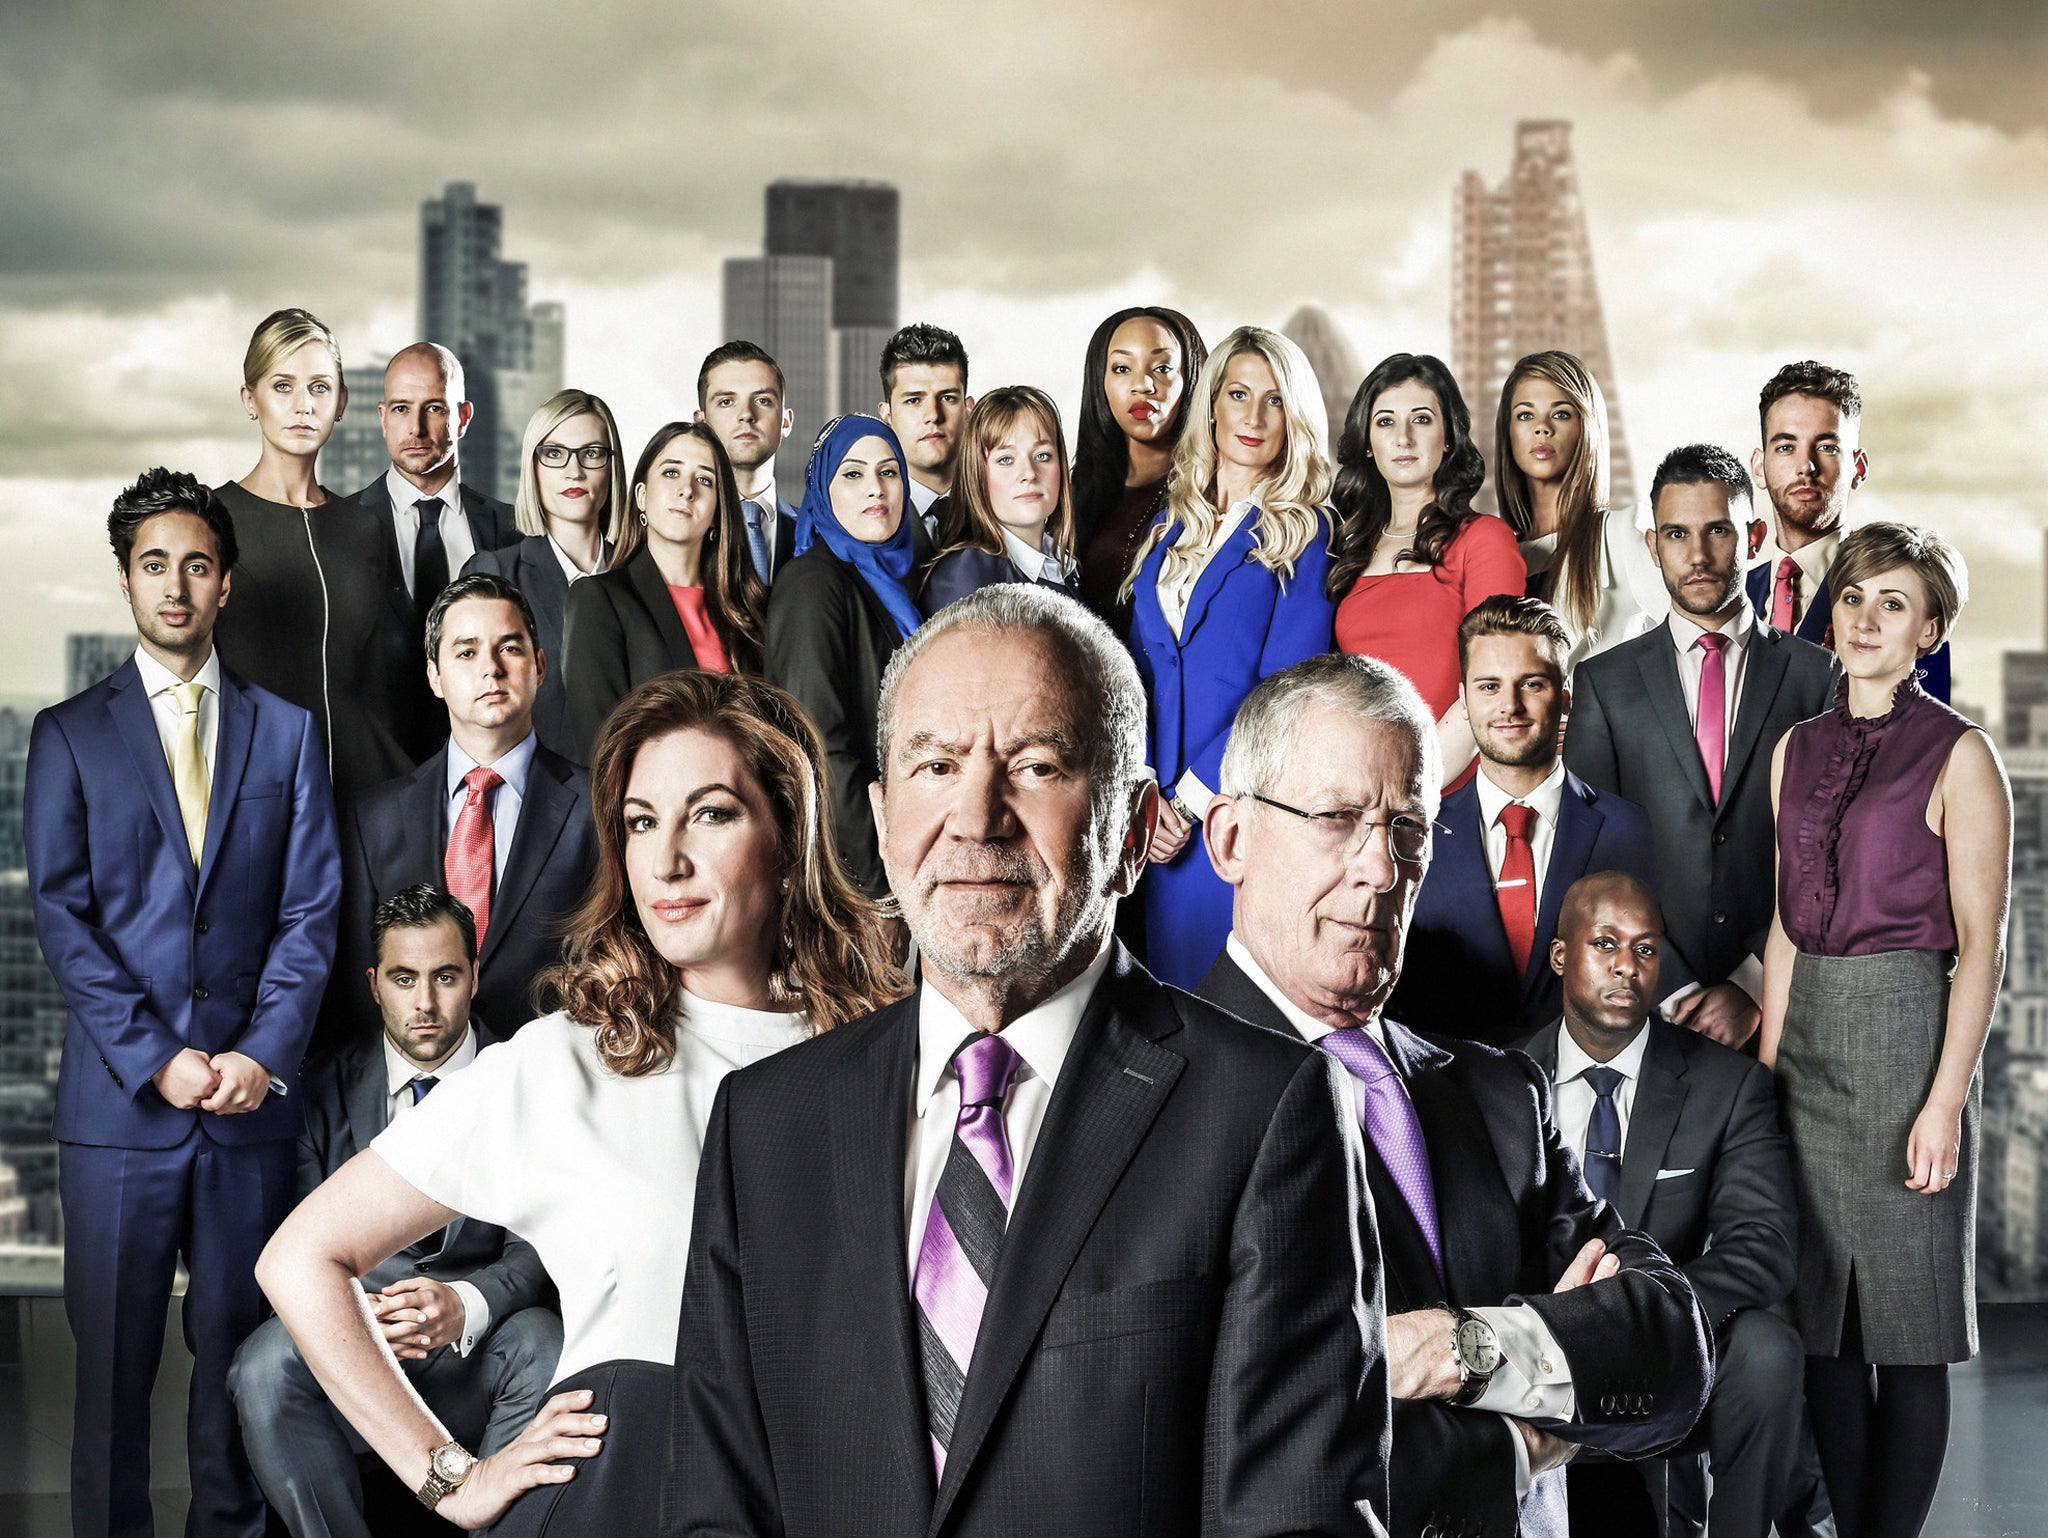 The Apprentice 2014 contestants pictured with Karen Brady, Lord Sugar and Nick Hewer